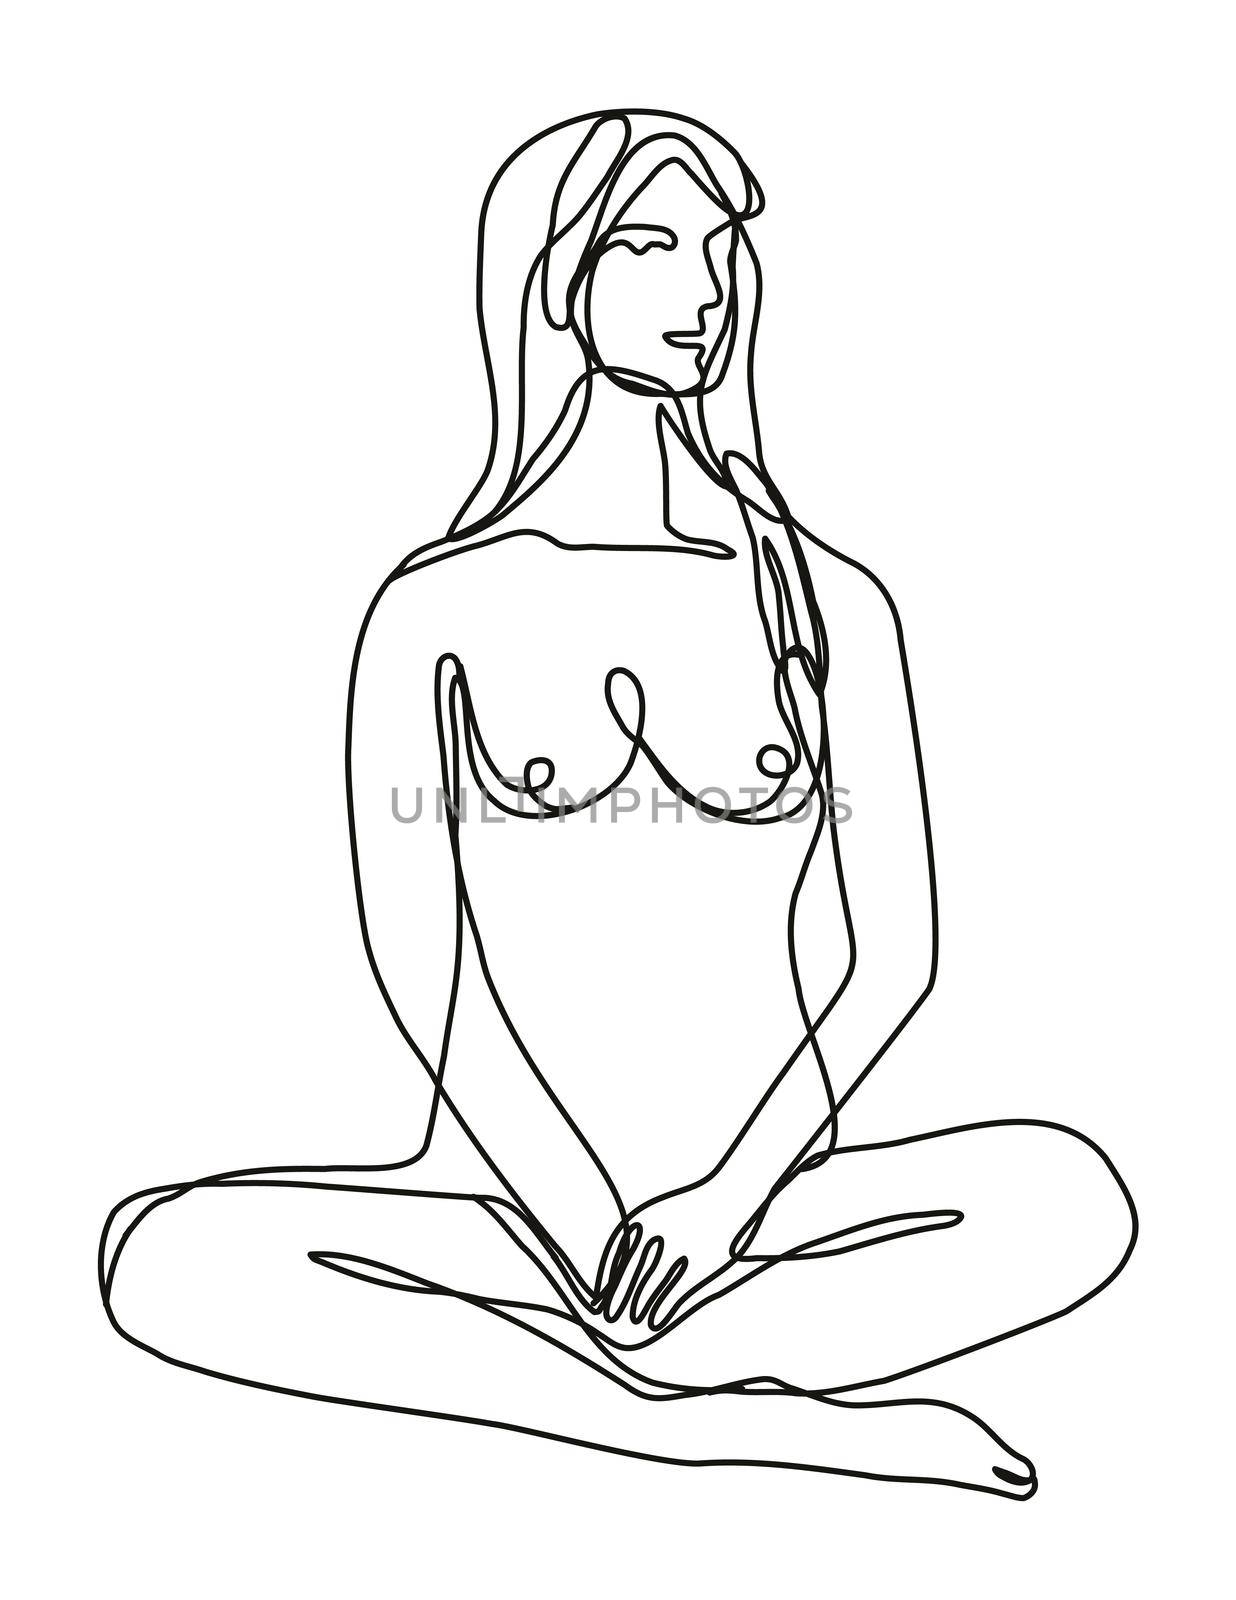 Female Nude Sitting Lotus Position Front View Continuous Line Doodle Drawing by patrimonio